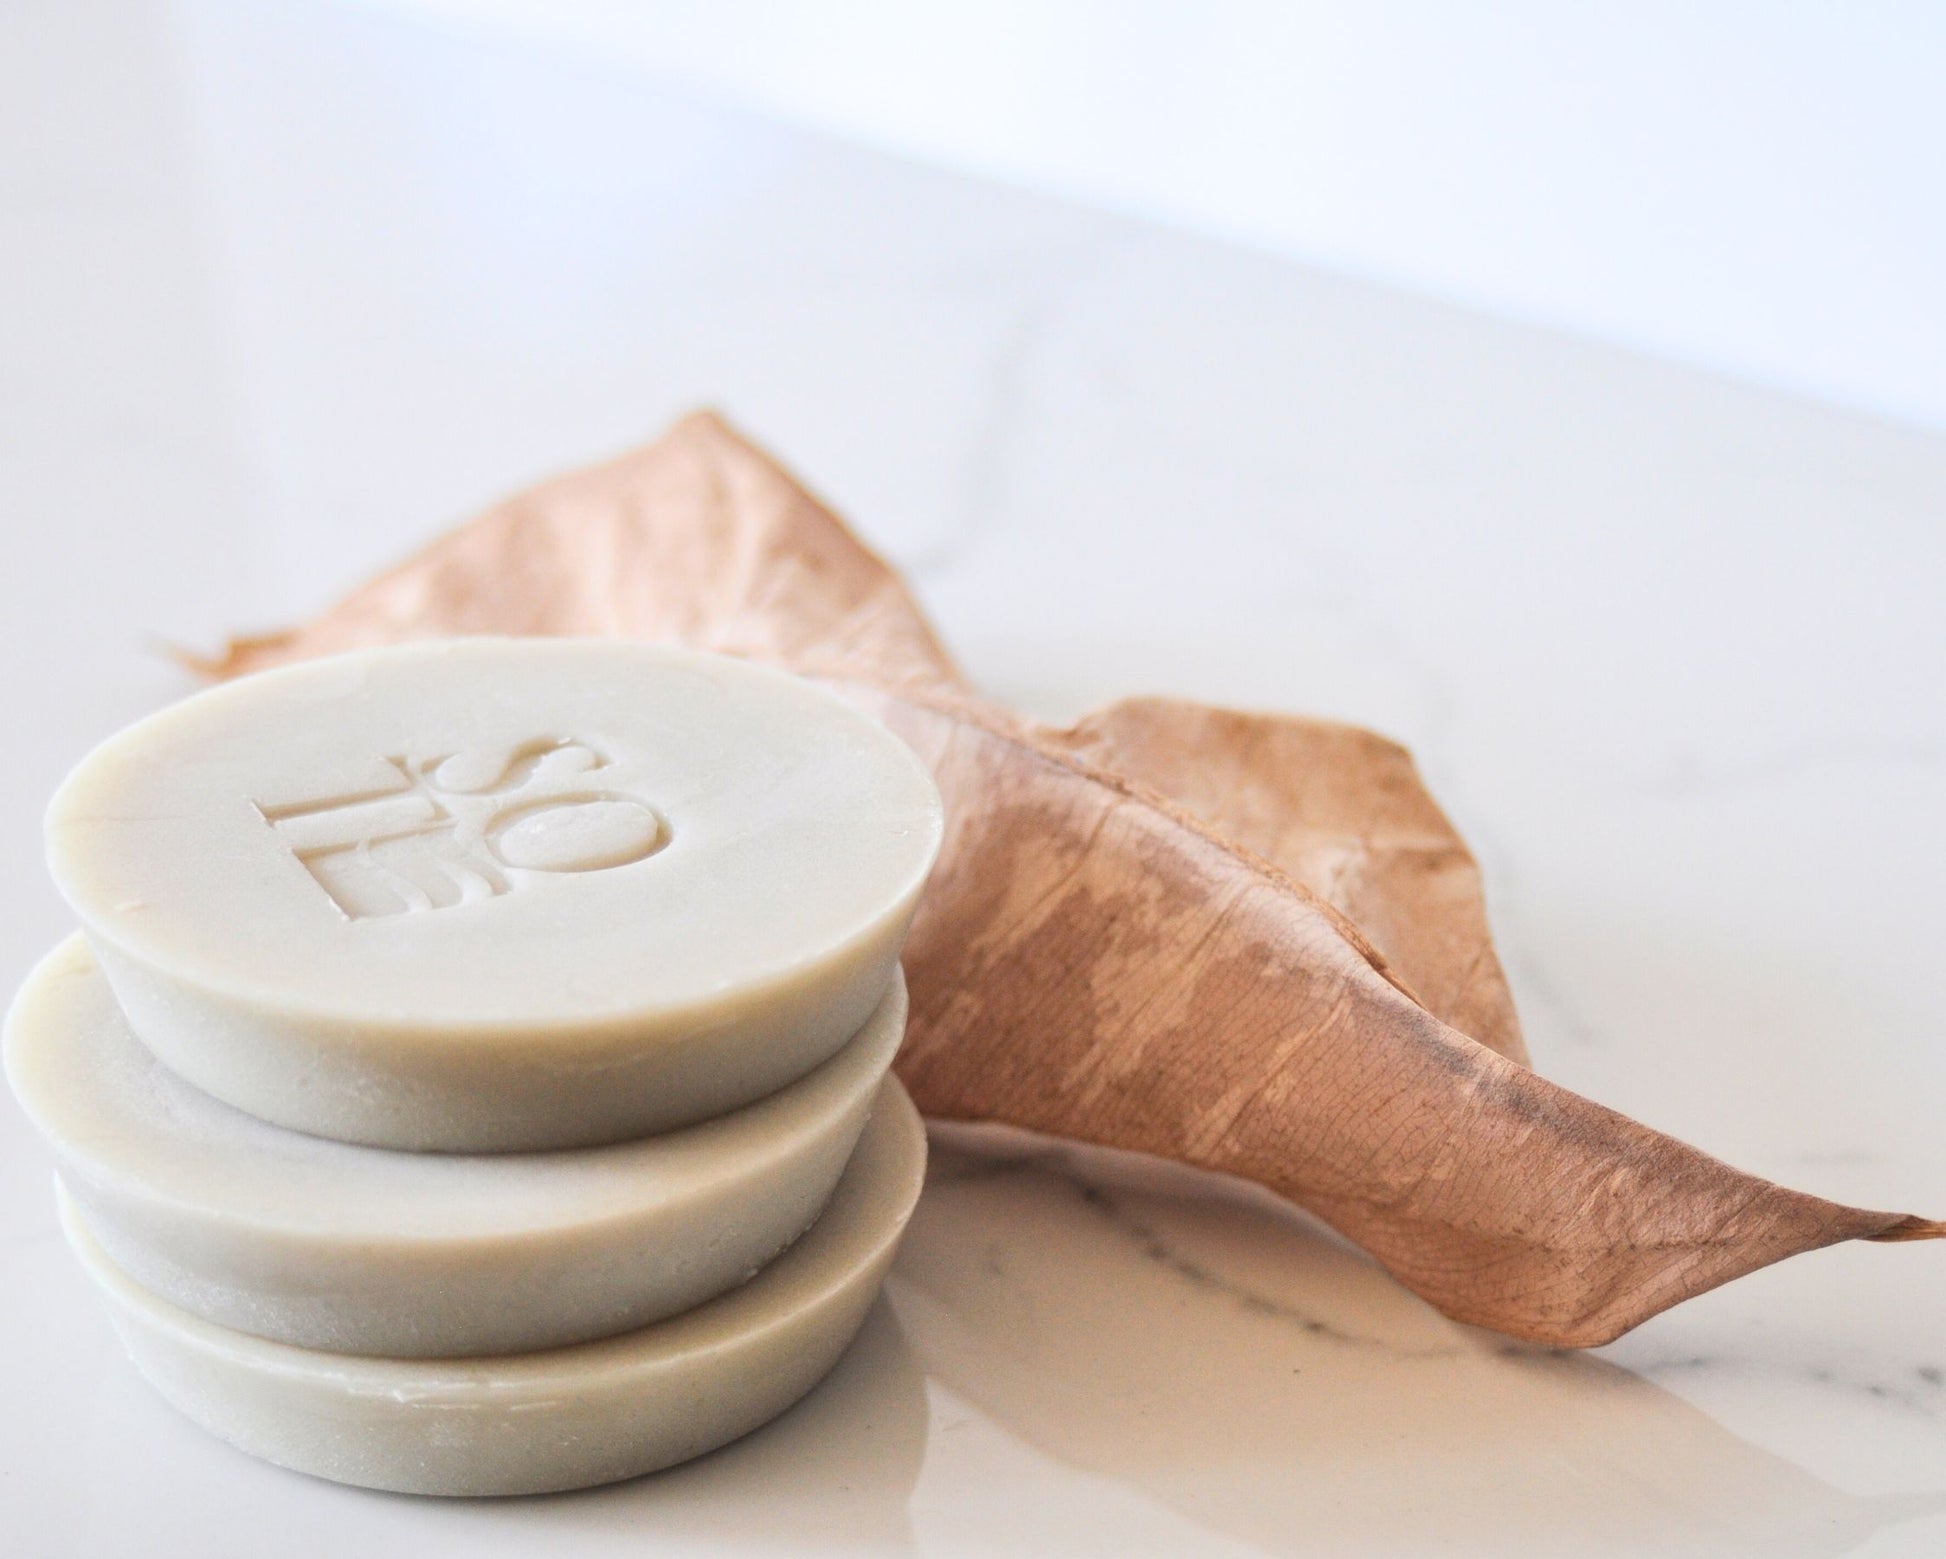 SANDALWOOD SHAVE SOAP : INDULGENCE & PRECISION with KOKUM AND SHEA BUTTER - SALT OF THE EARTH